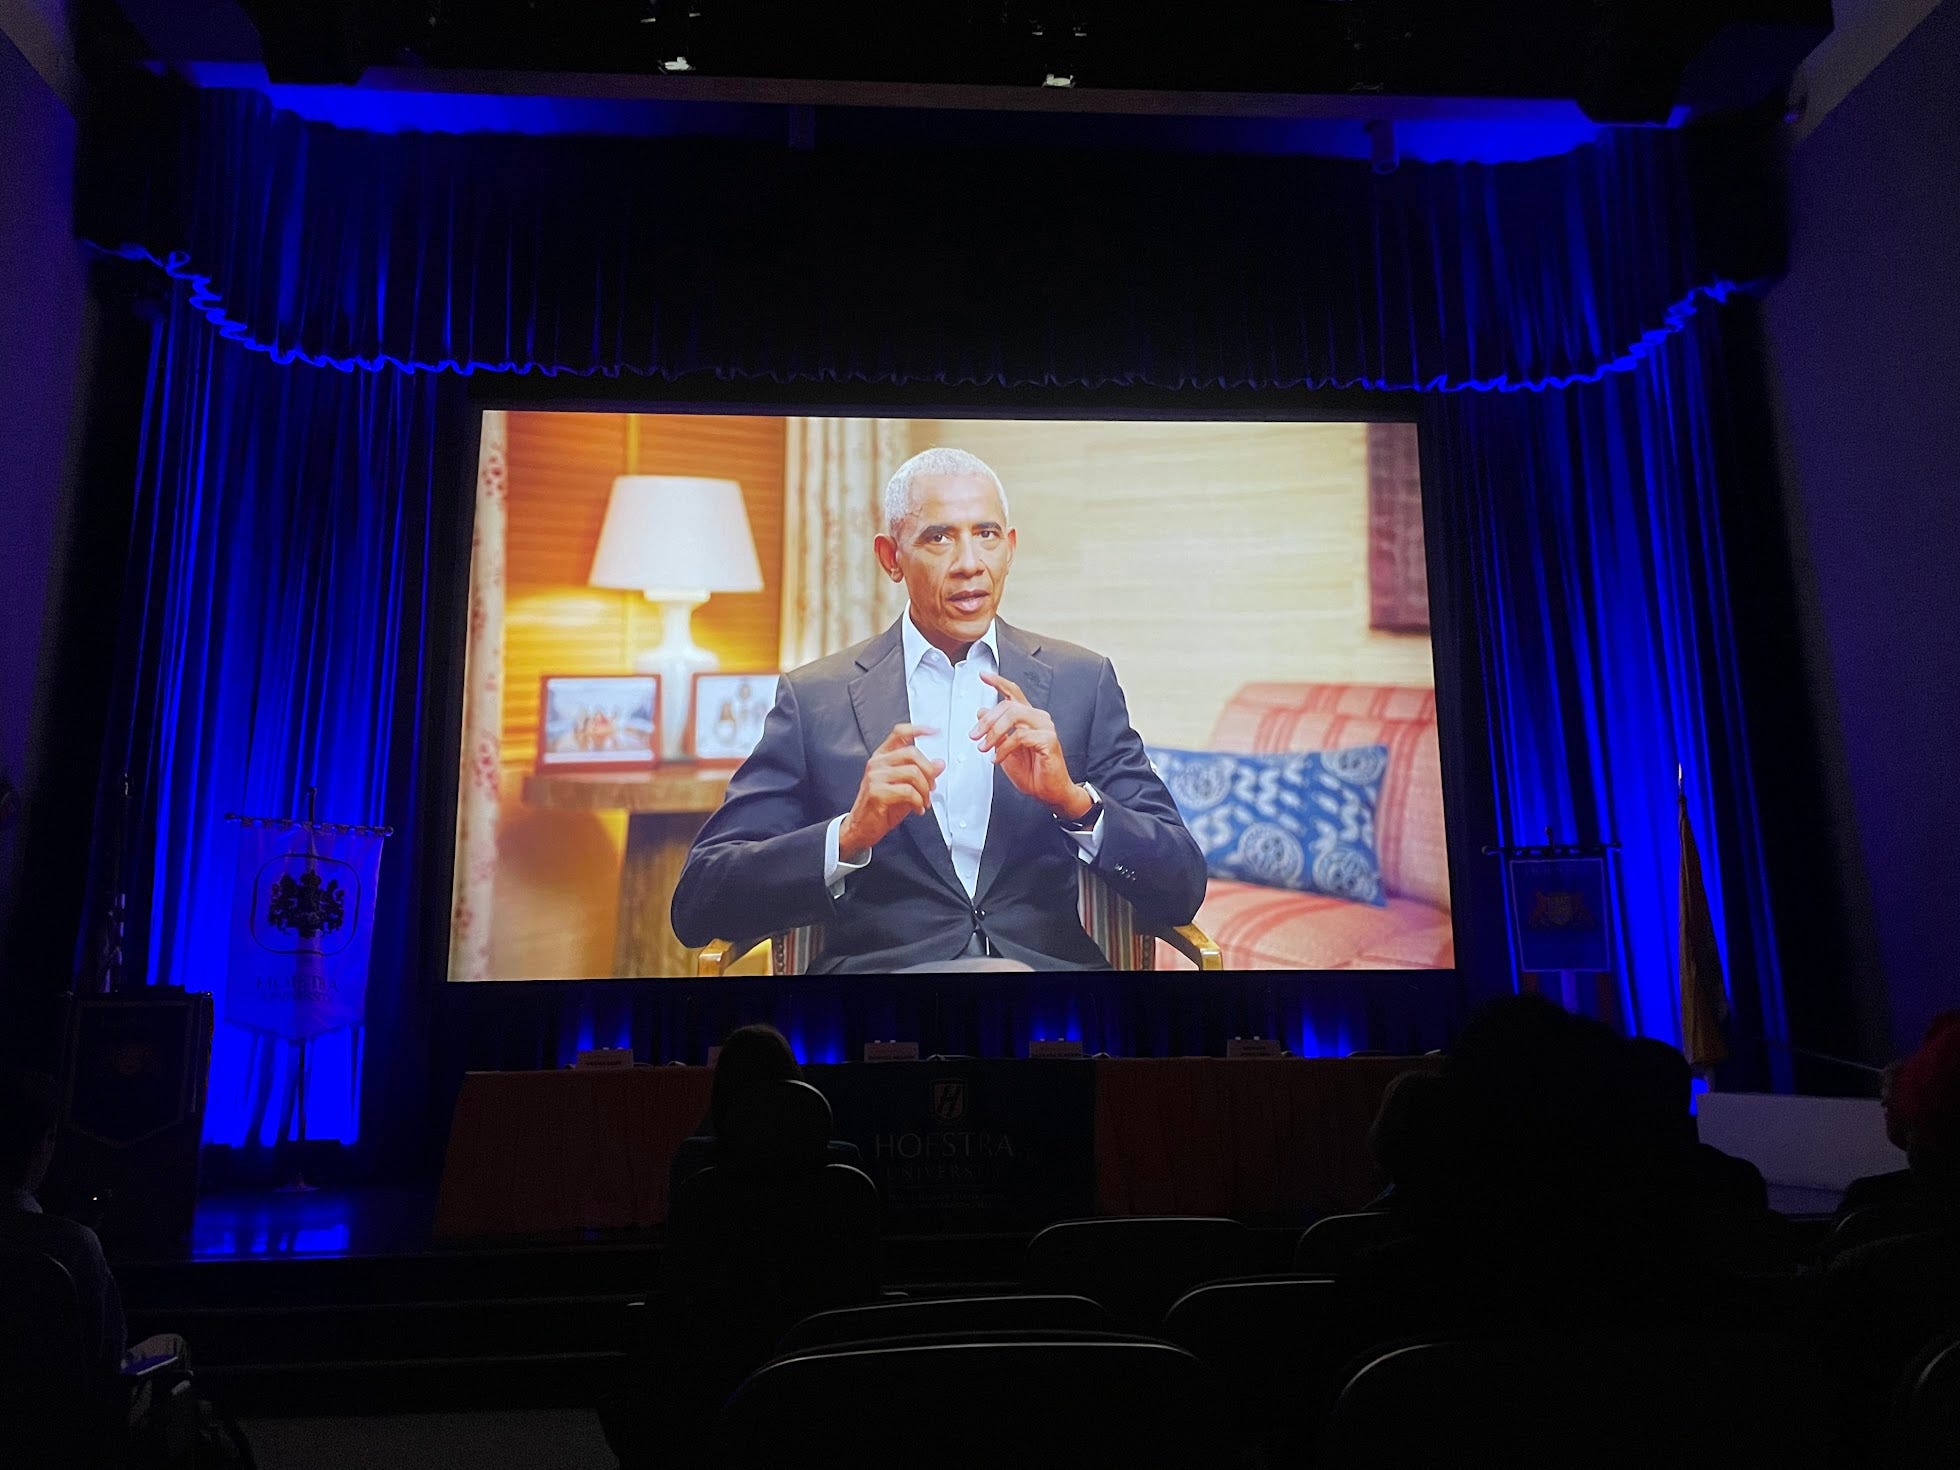 Former President Obama shown on a large projection during the opening session of Hofstra University's presidential conference